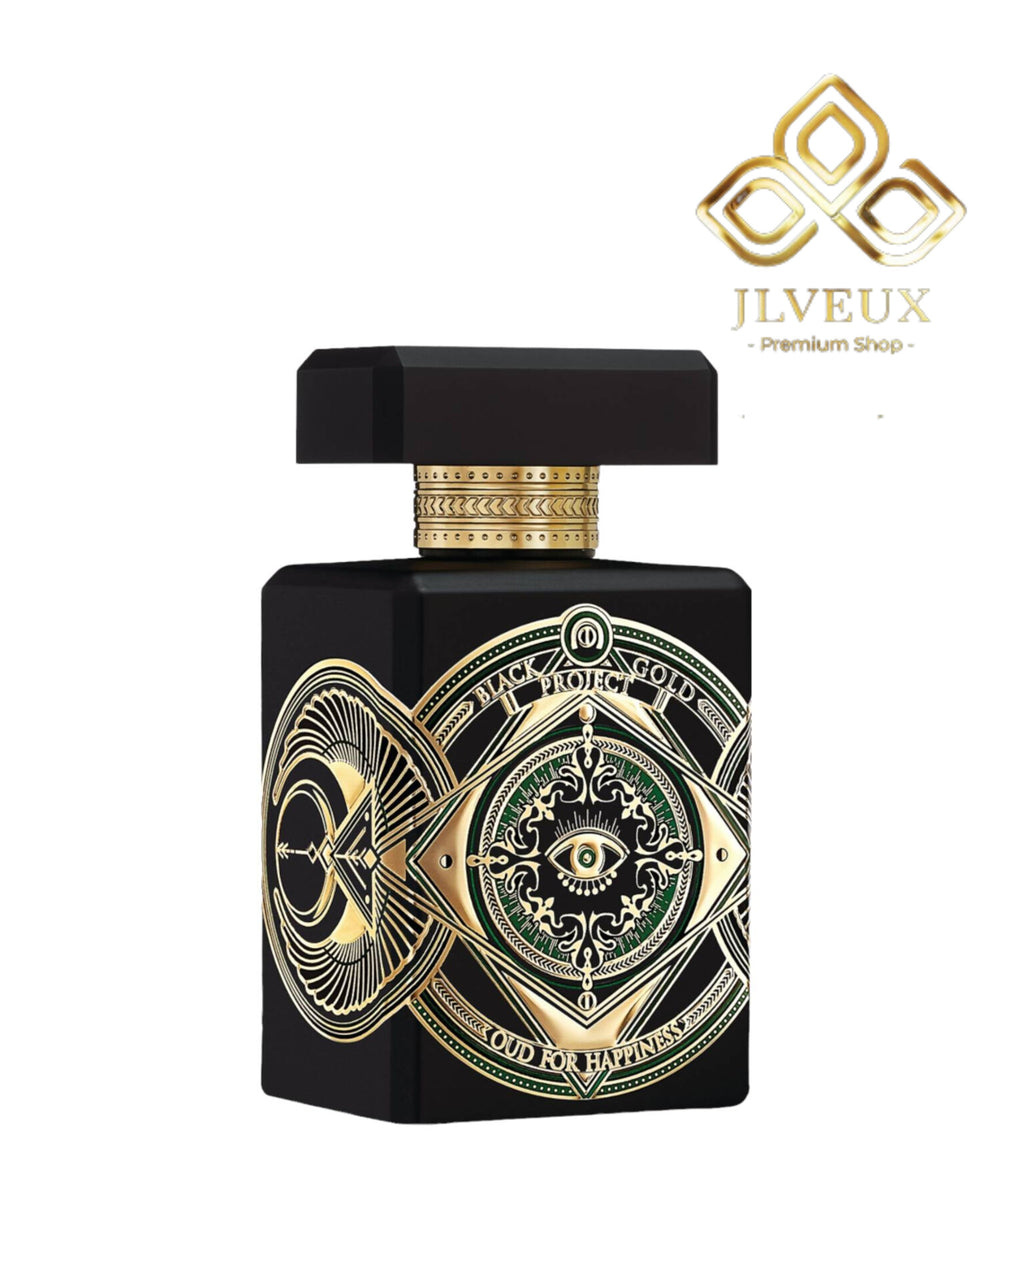 Oud for Greatness Initio Parfums Prives